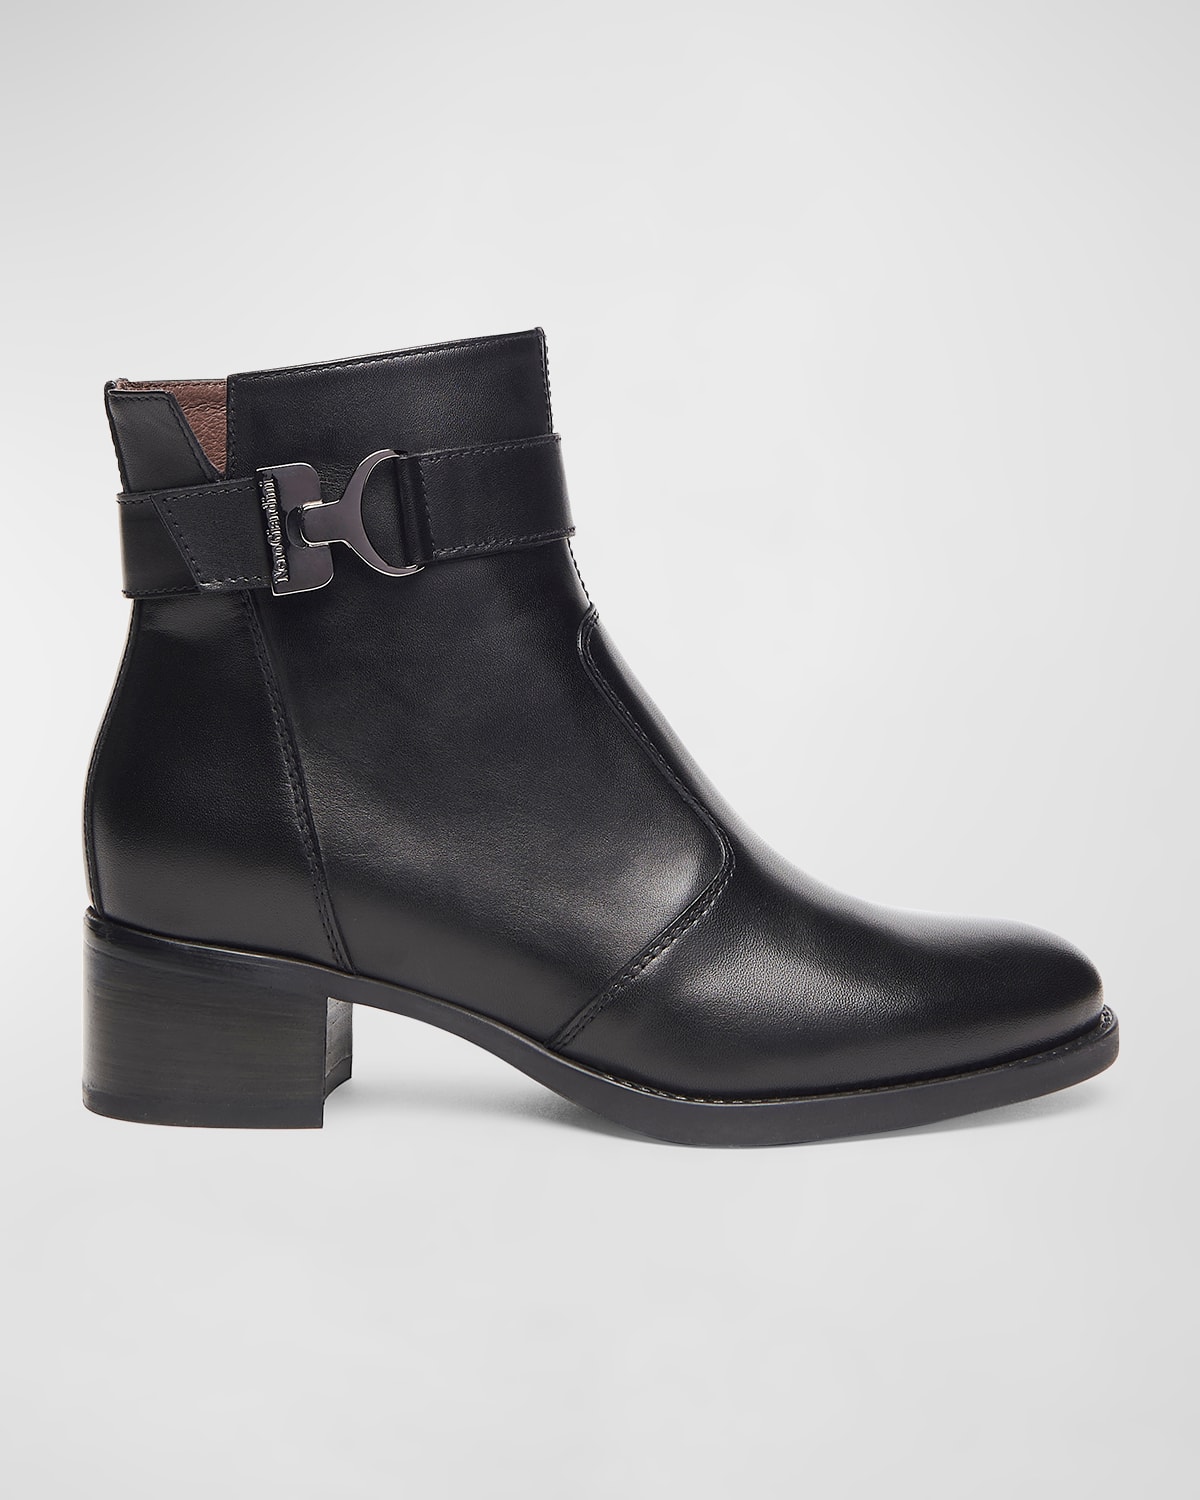 Leather Buckle Ankle Booties